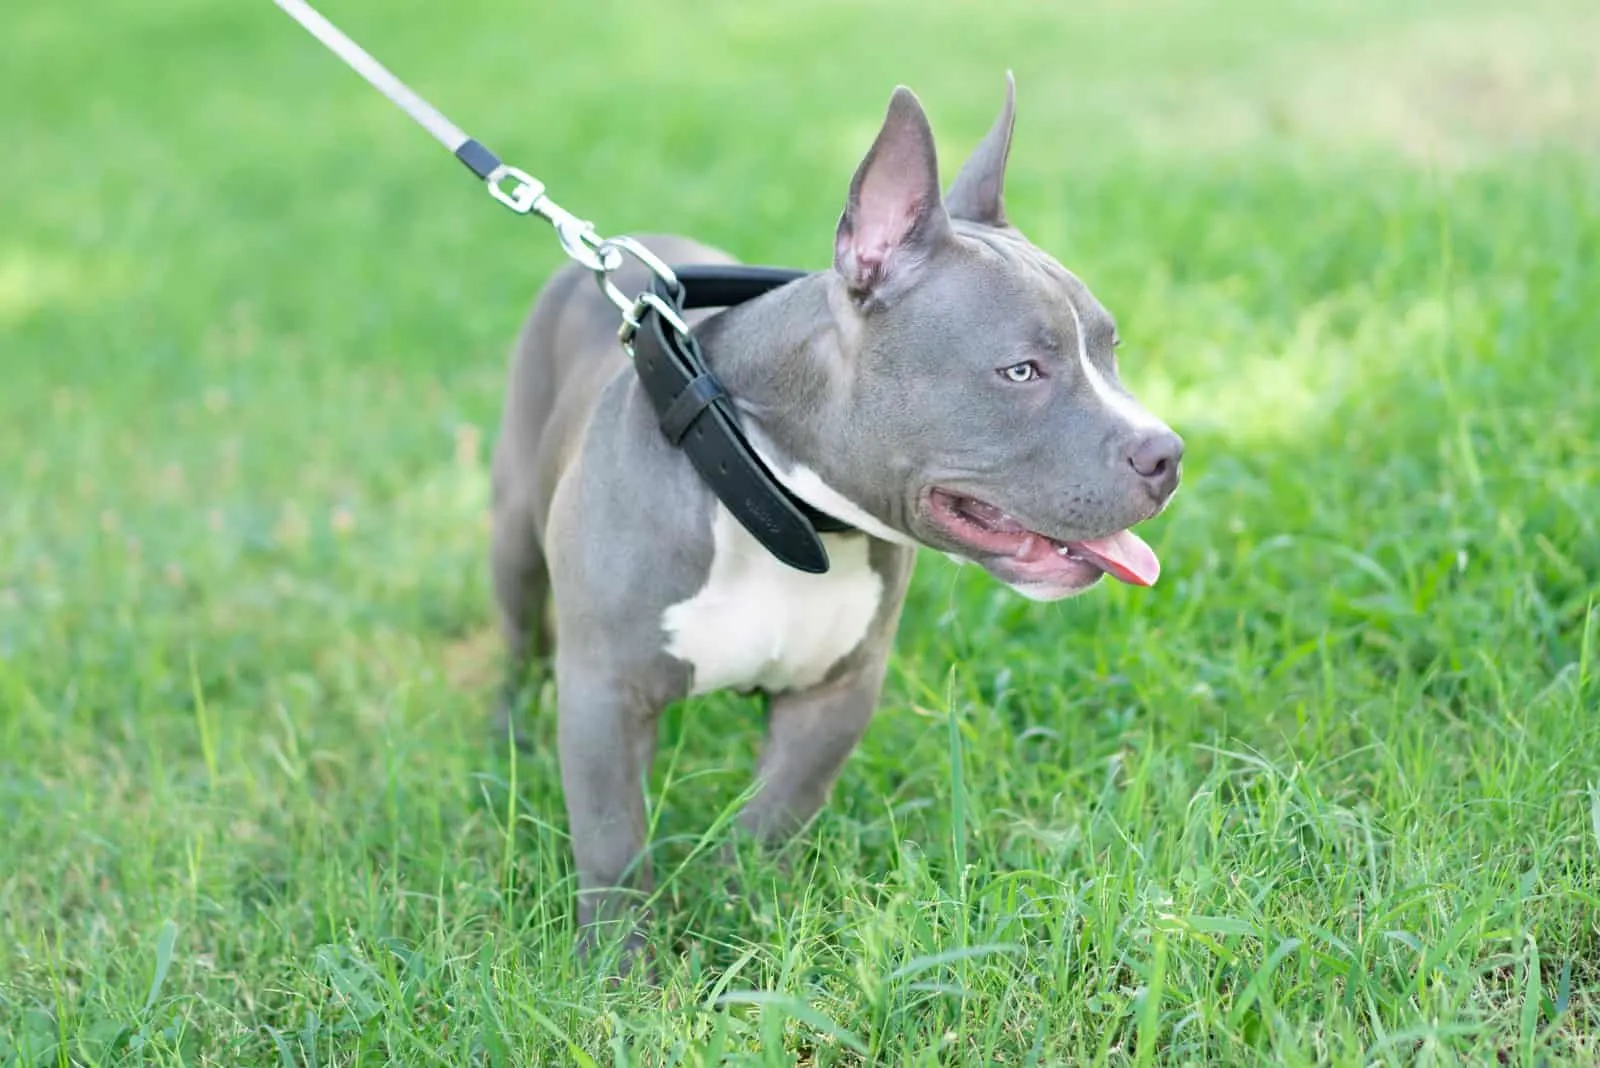 Blue American Bully standing on grass